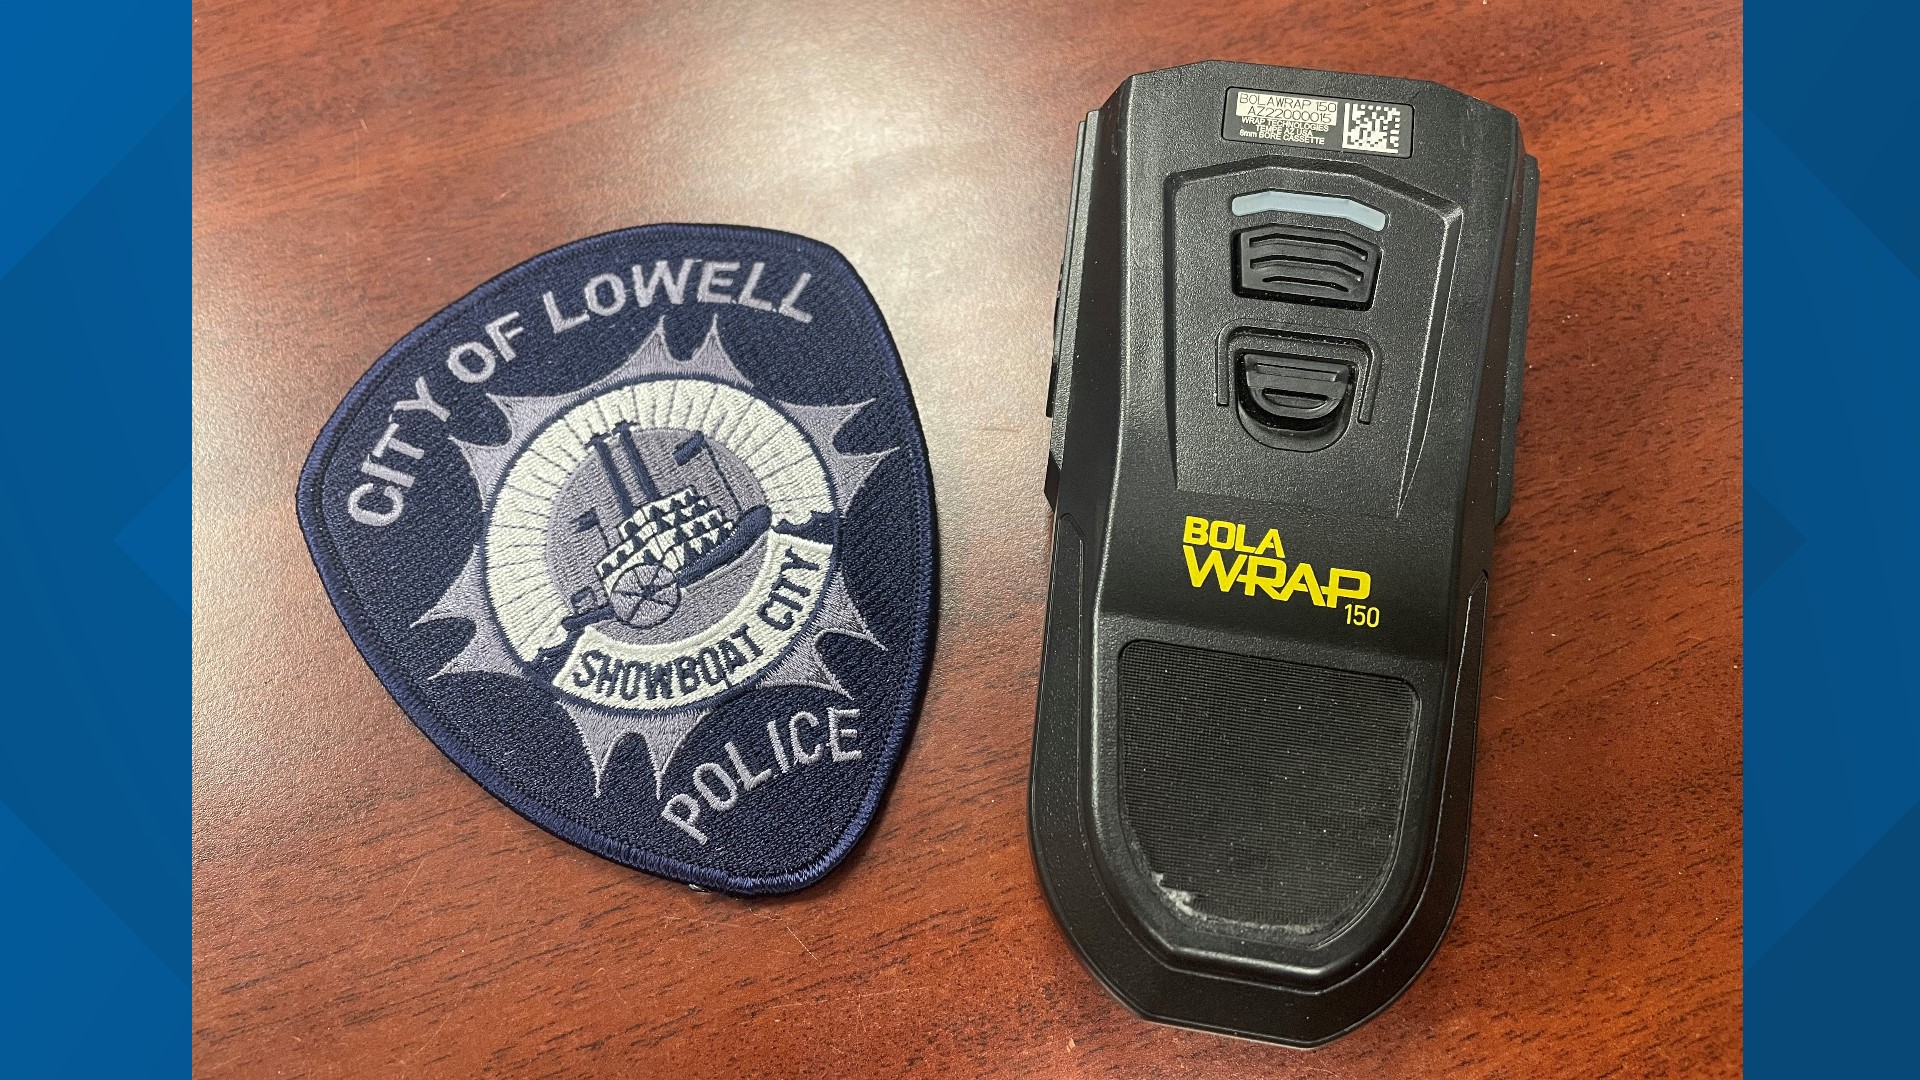 All eleven officers on the force are carrying the BolaWrap 150. It's a handheld remote device that expels a cord to restrain suspects from a distance.